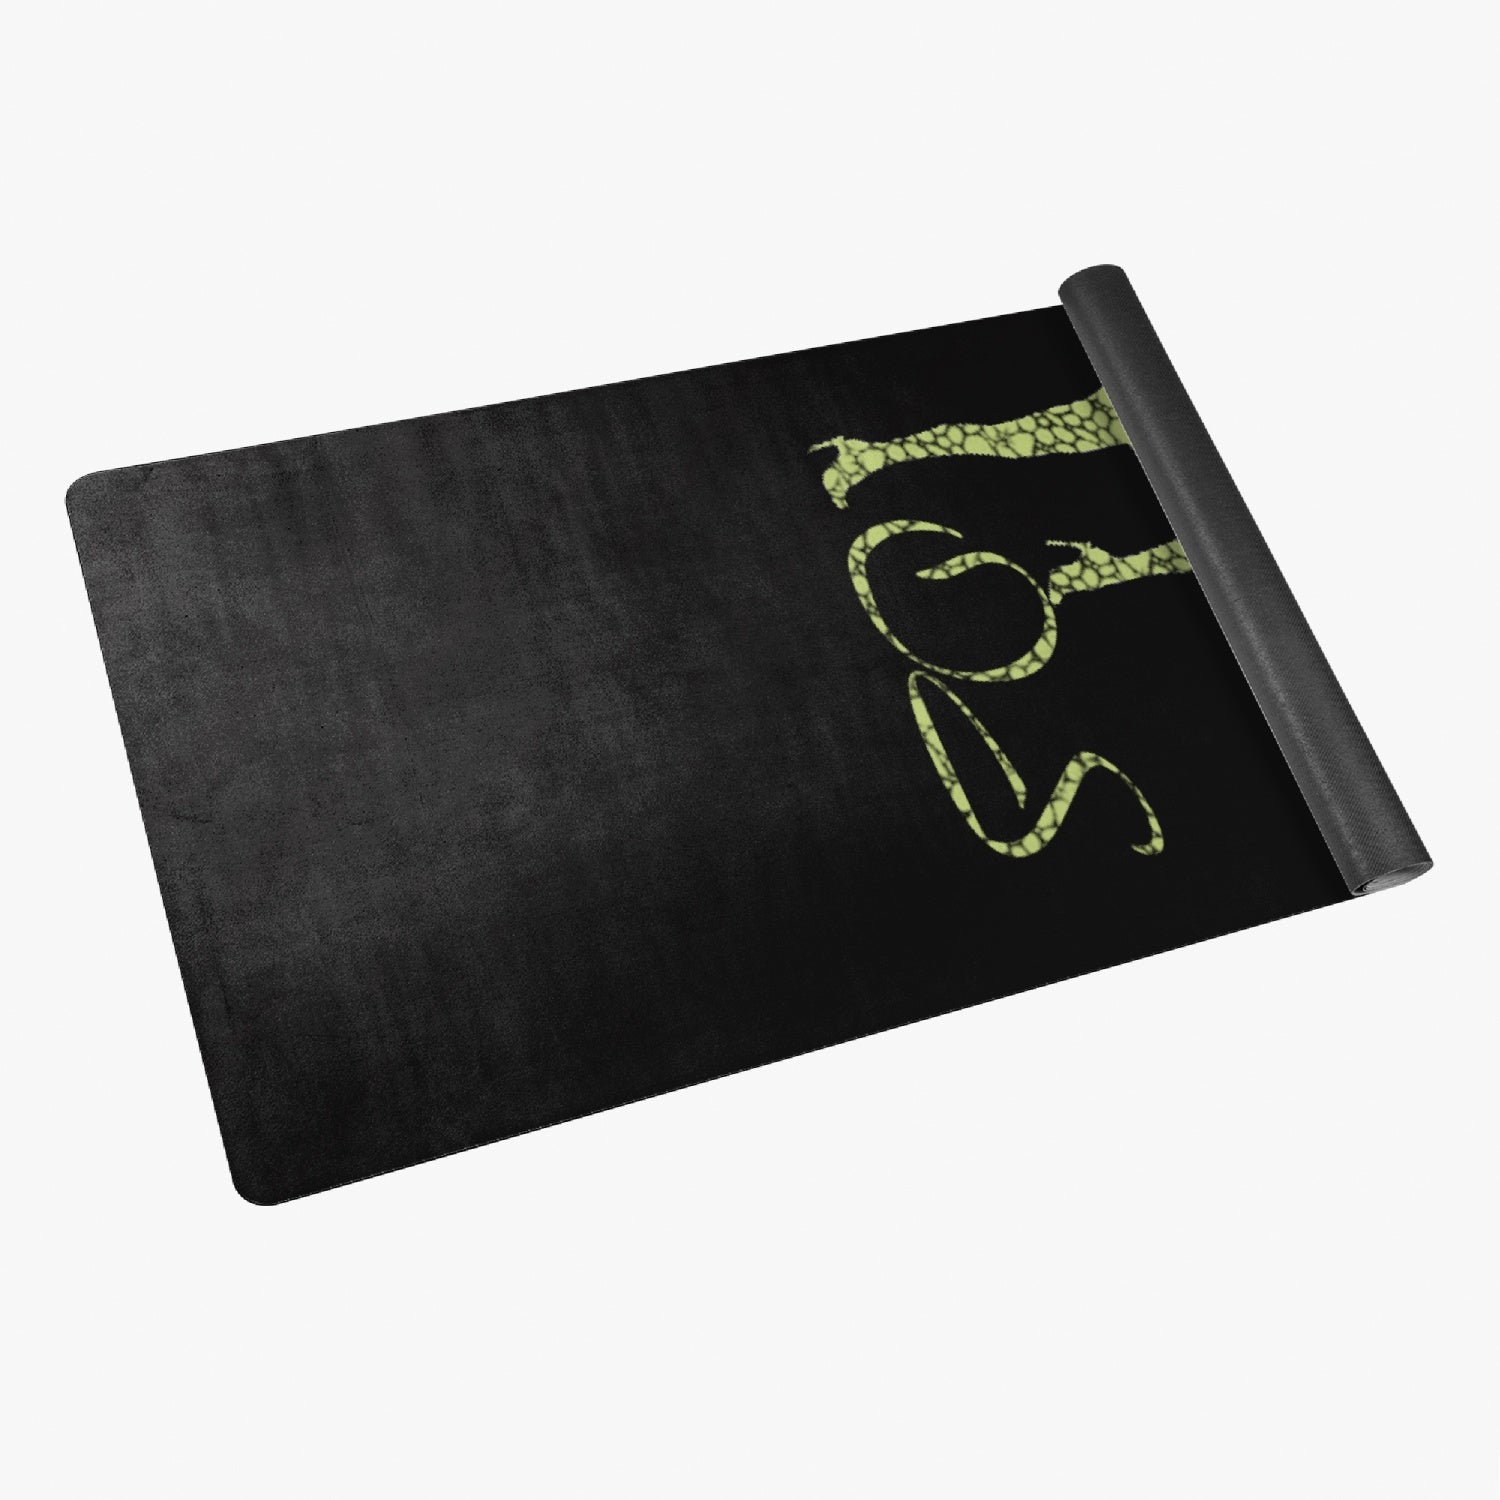 Officially Sexy Neon Green AM 270 Suede Anti-slip Yoga Mat 2